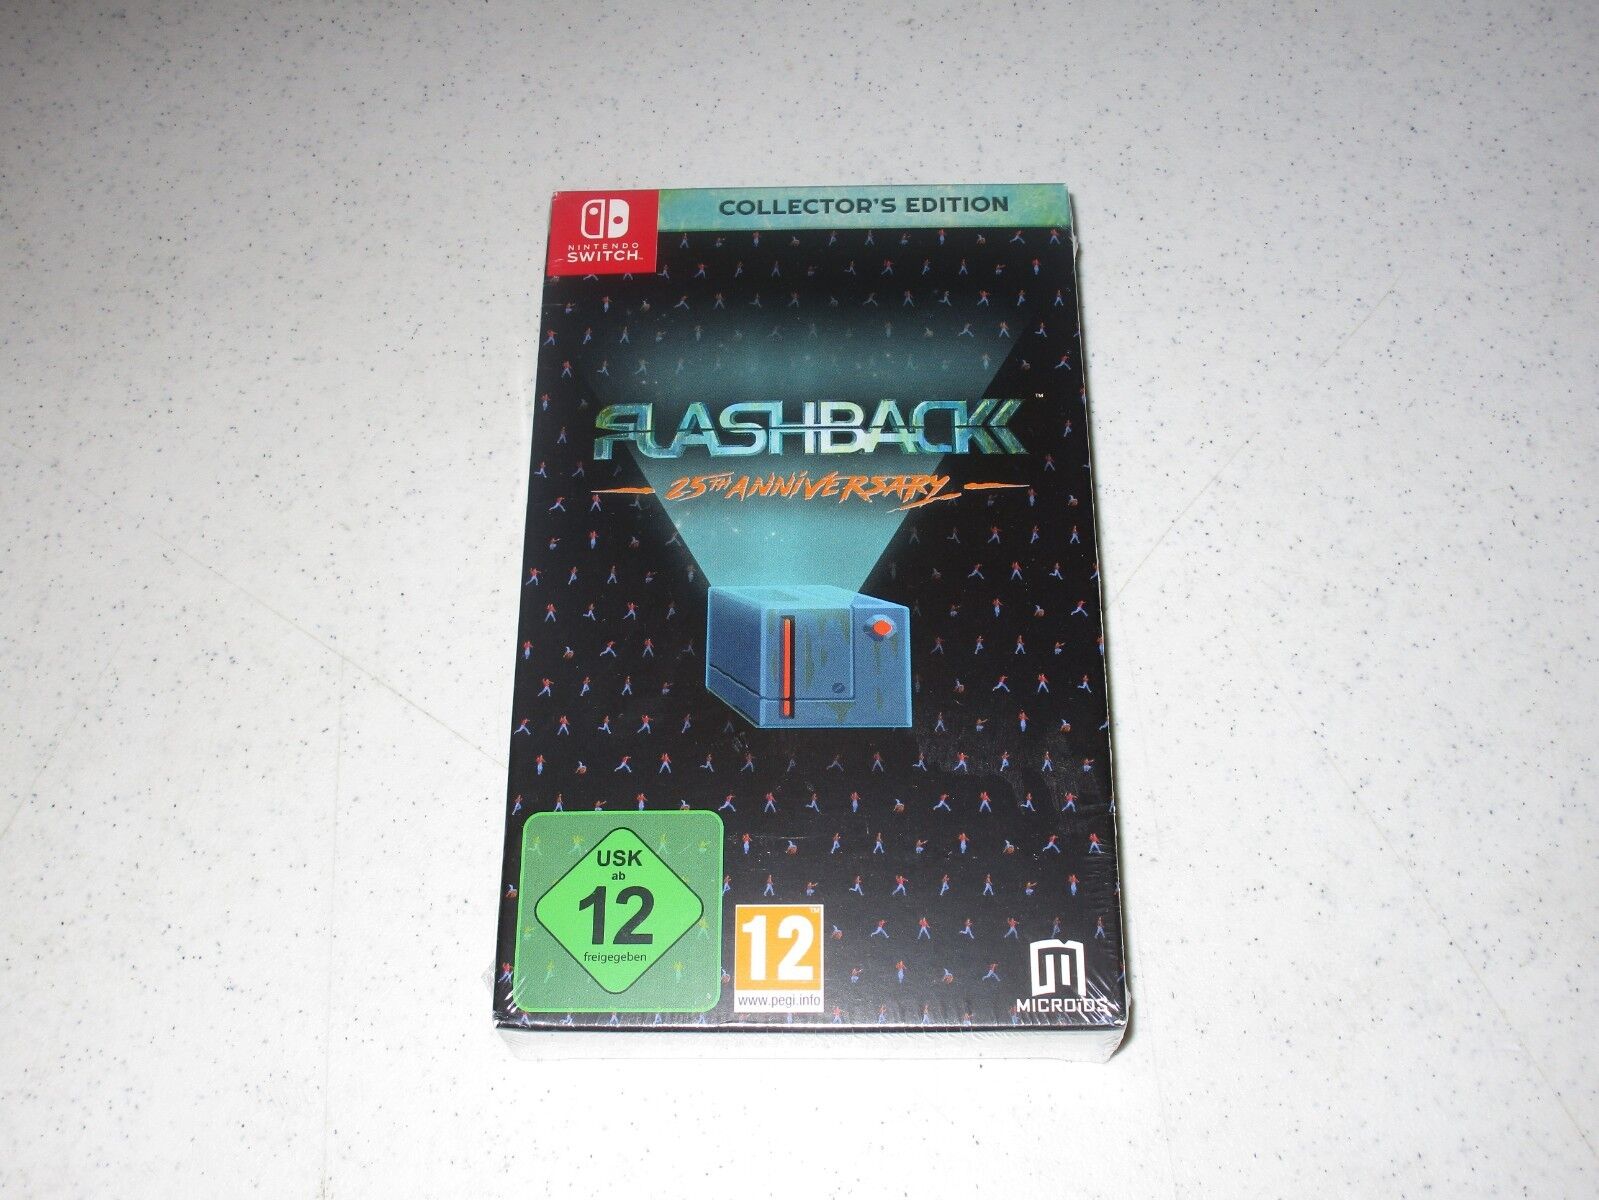 Flashback 25th Anniversary Collector's Edition Nintendo Switch Import Sealed